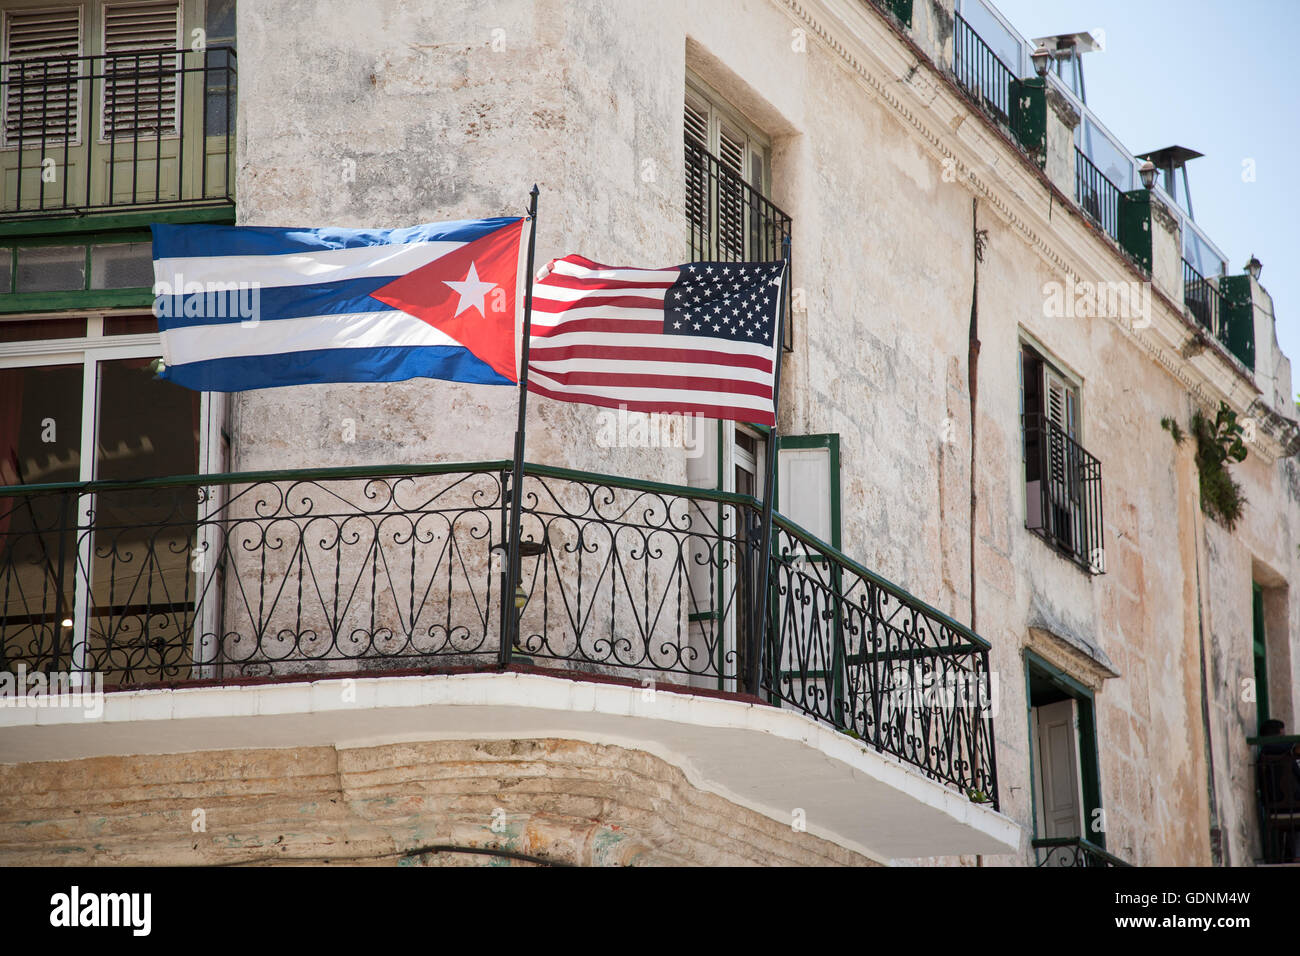 The American and Cuban national flags on a balcony in Havana, Cuba Stock Photo